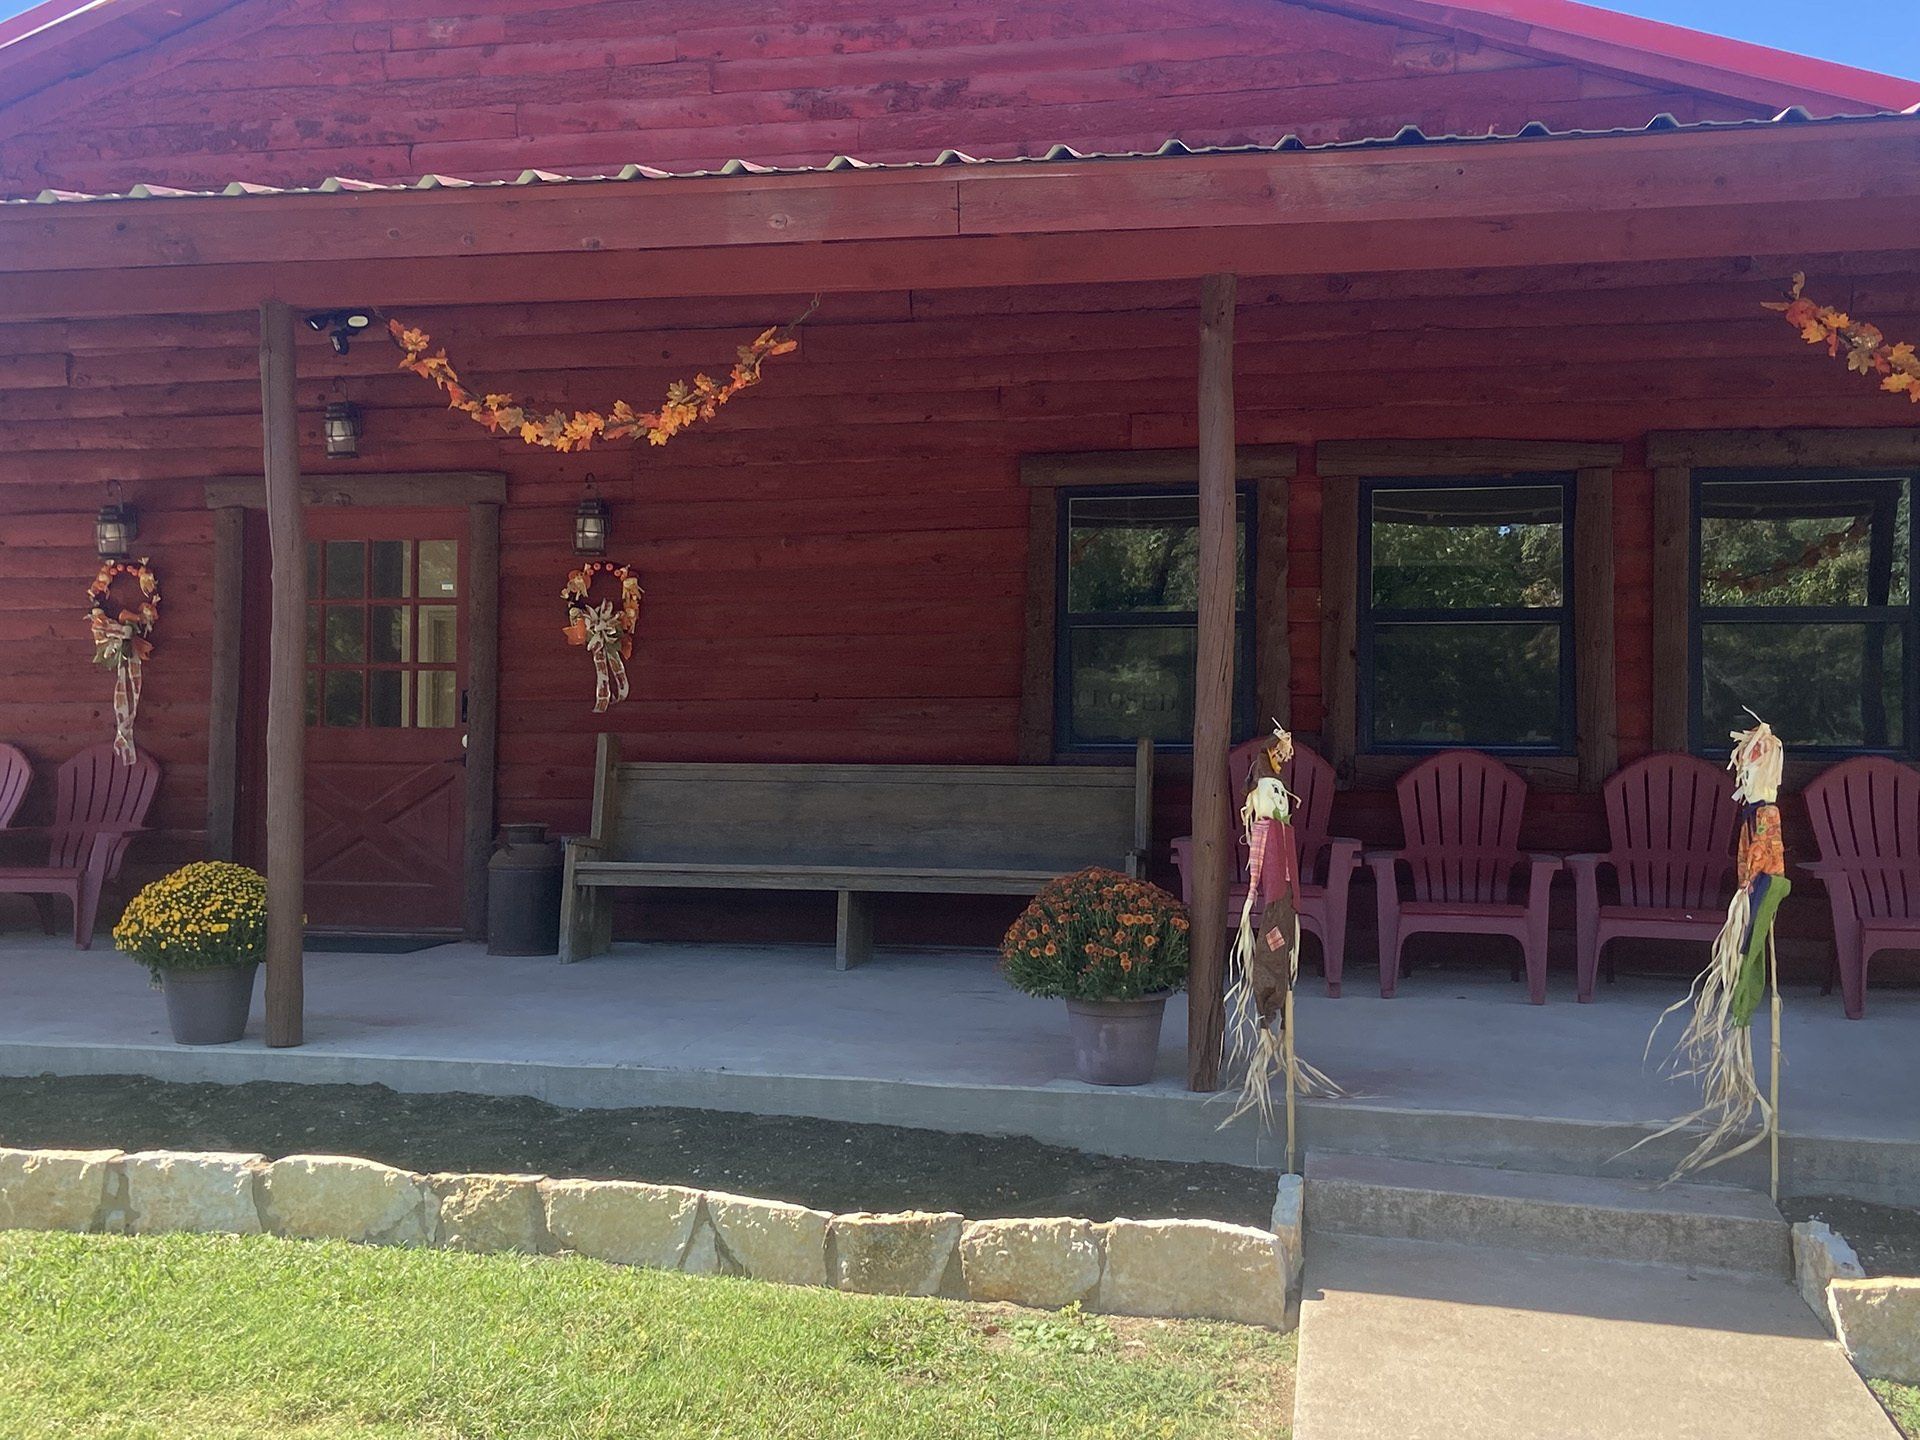 A red log cabin with a porch decorated for halloween